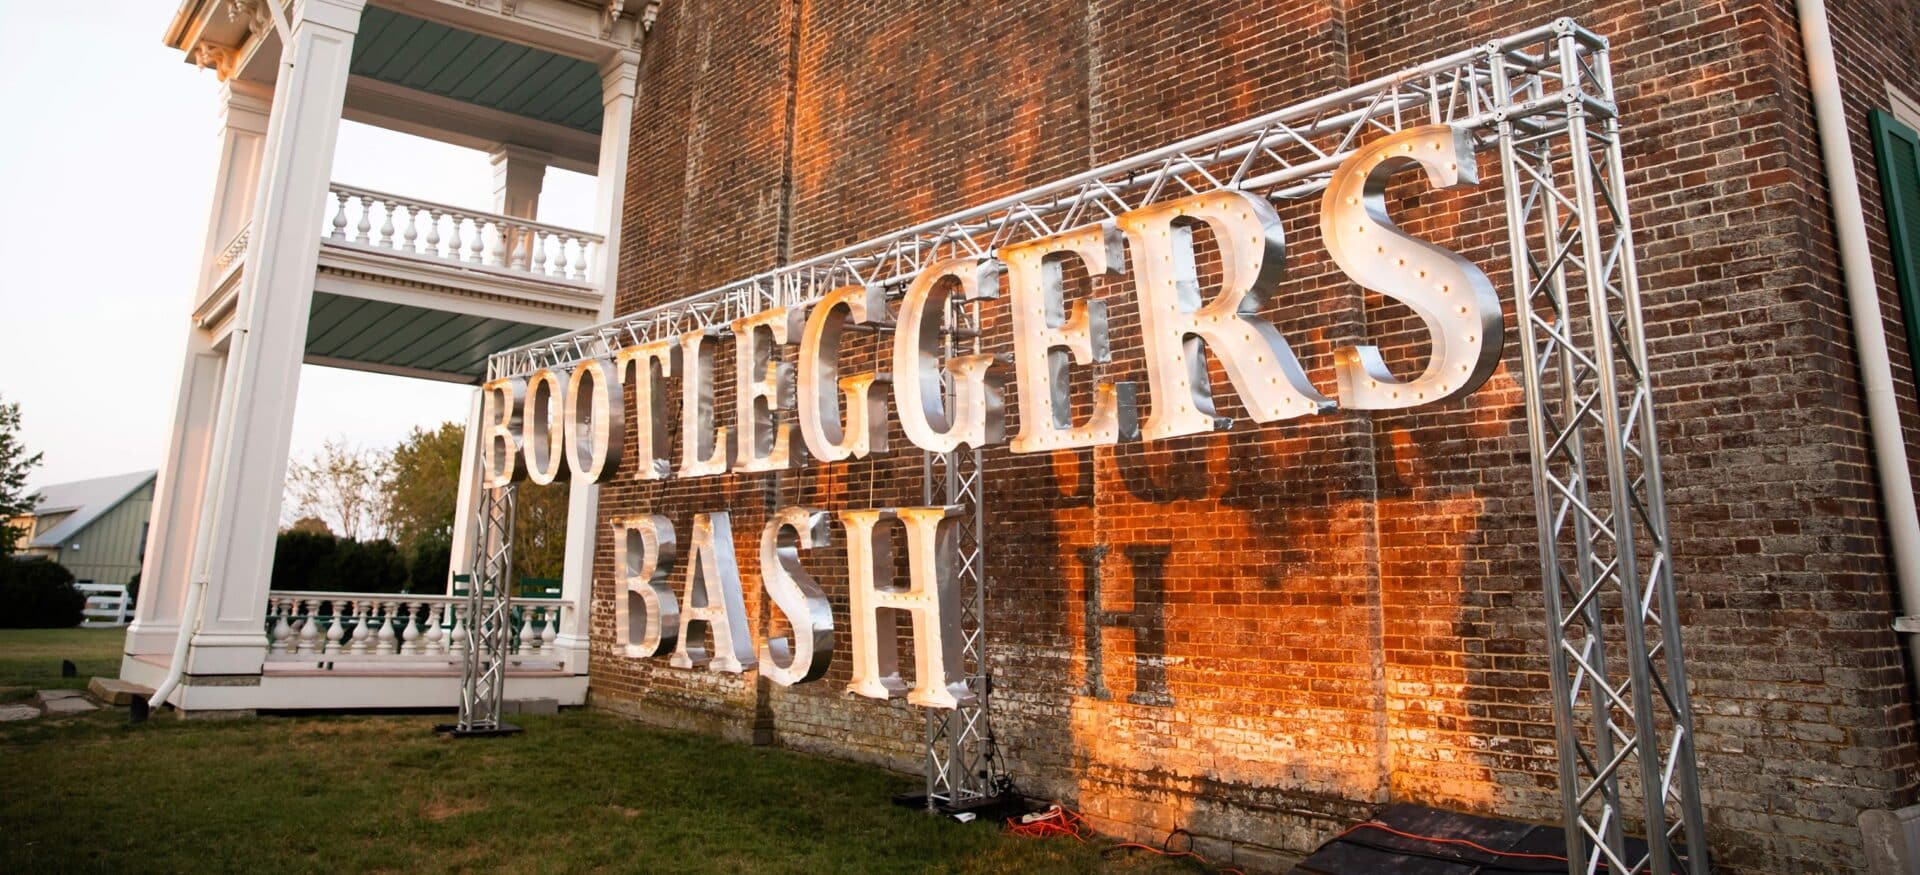 Bootlegger’s Bash sign, an annual event in Franklin, TN featuring Tennessee distillers, a traditional Southern dinner and live entertainment featuring Rock & Roll Pianos – a dueling piano team.